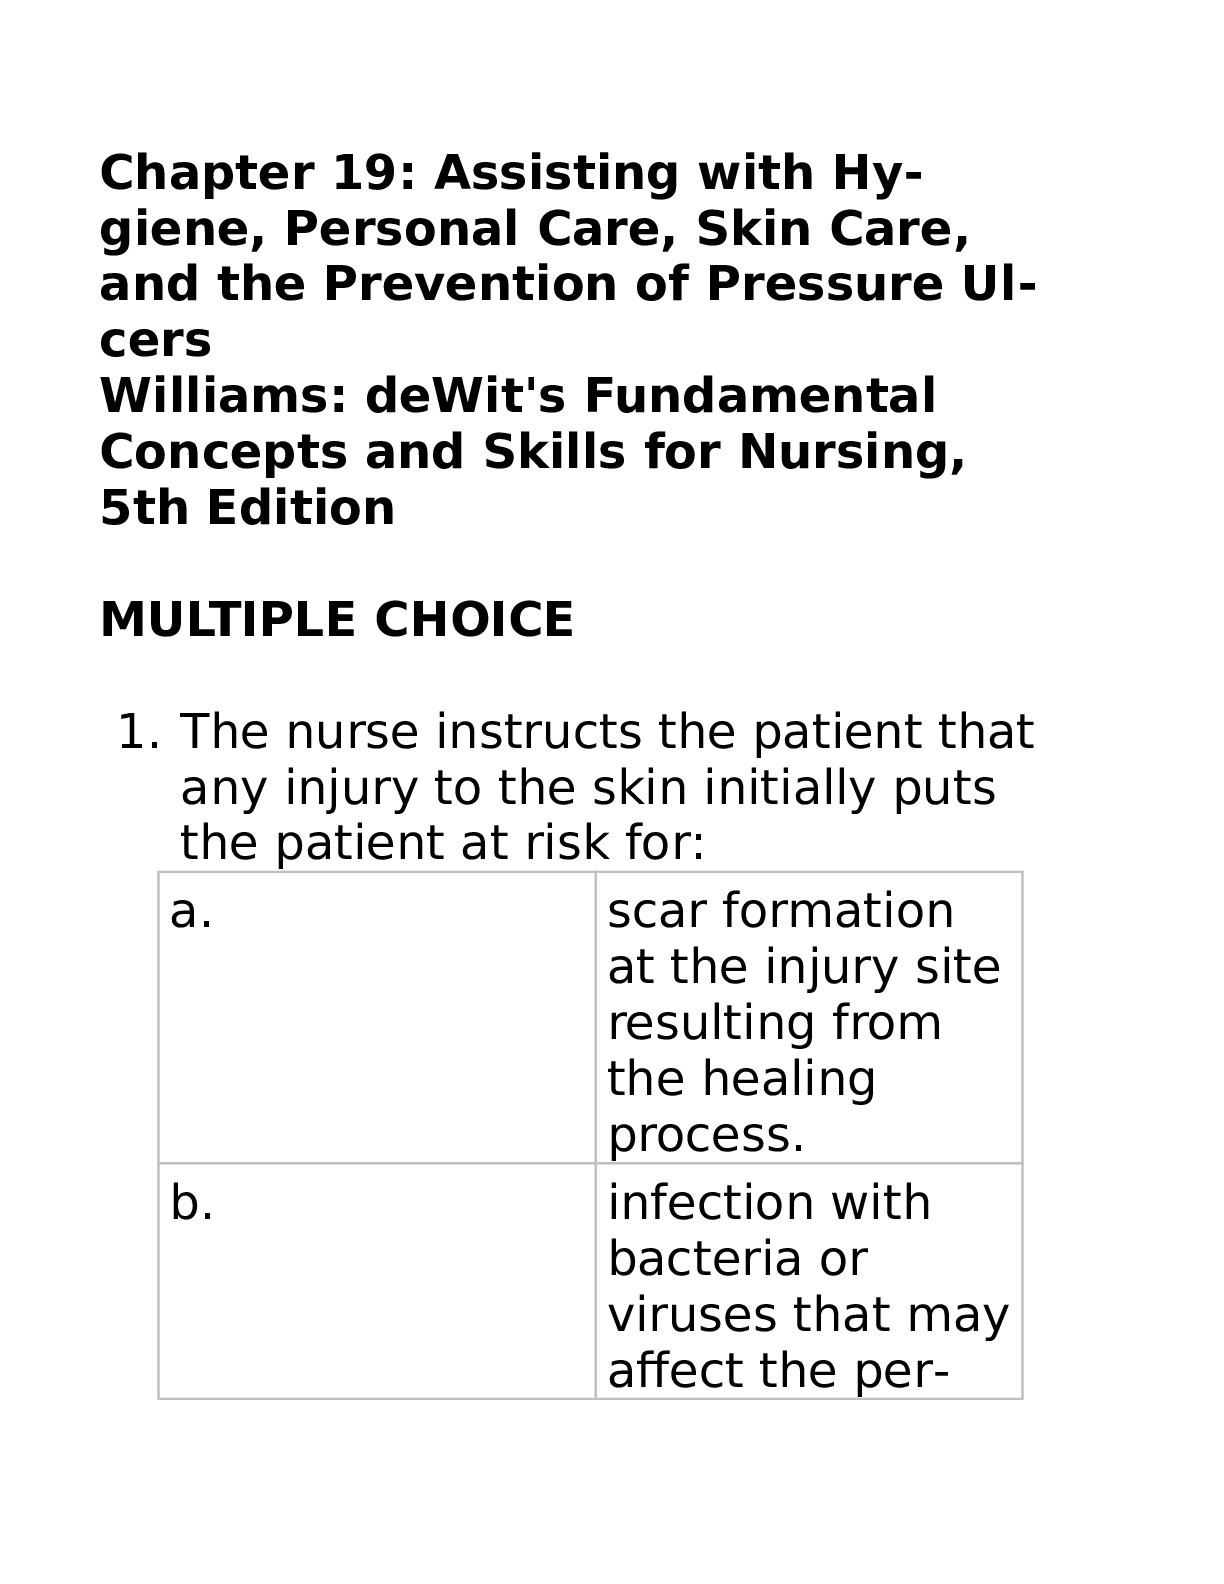 Chapter 19: Assisting with Hygiene, Personal Care, Skin Care, and the Prevention of Pressure Ulcers Williams: deWit's Fundamental Concepts and Skills for Nursing, 5th Edition